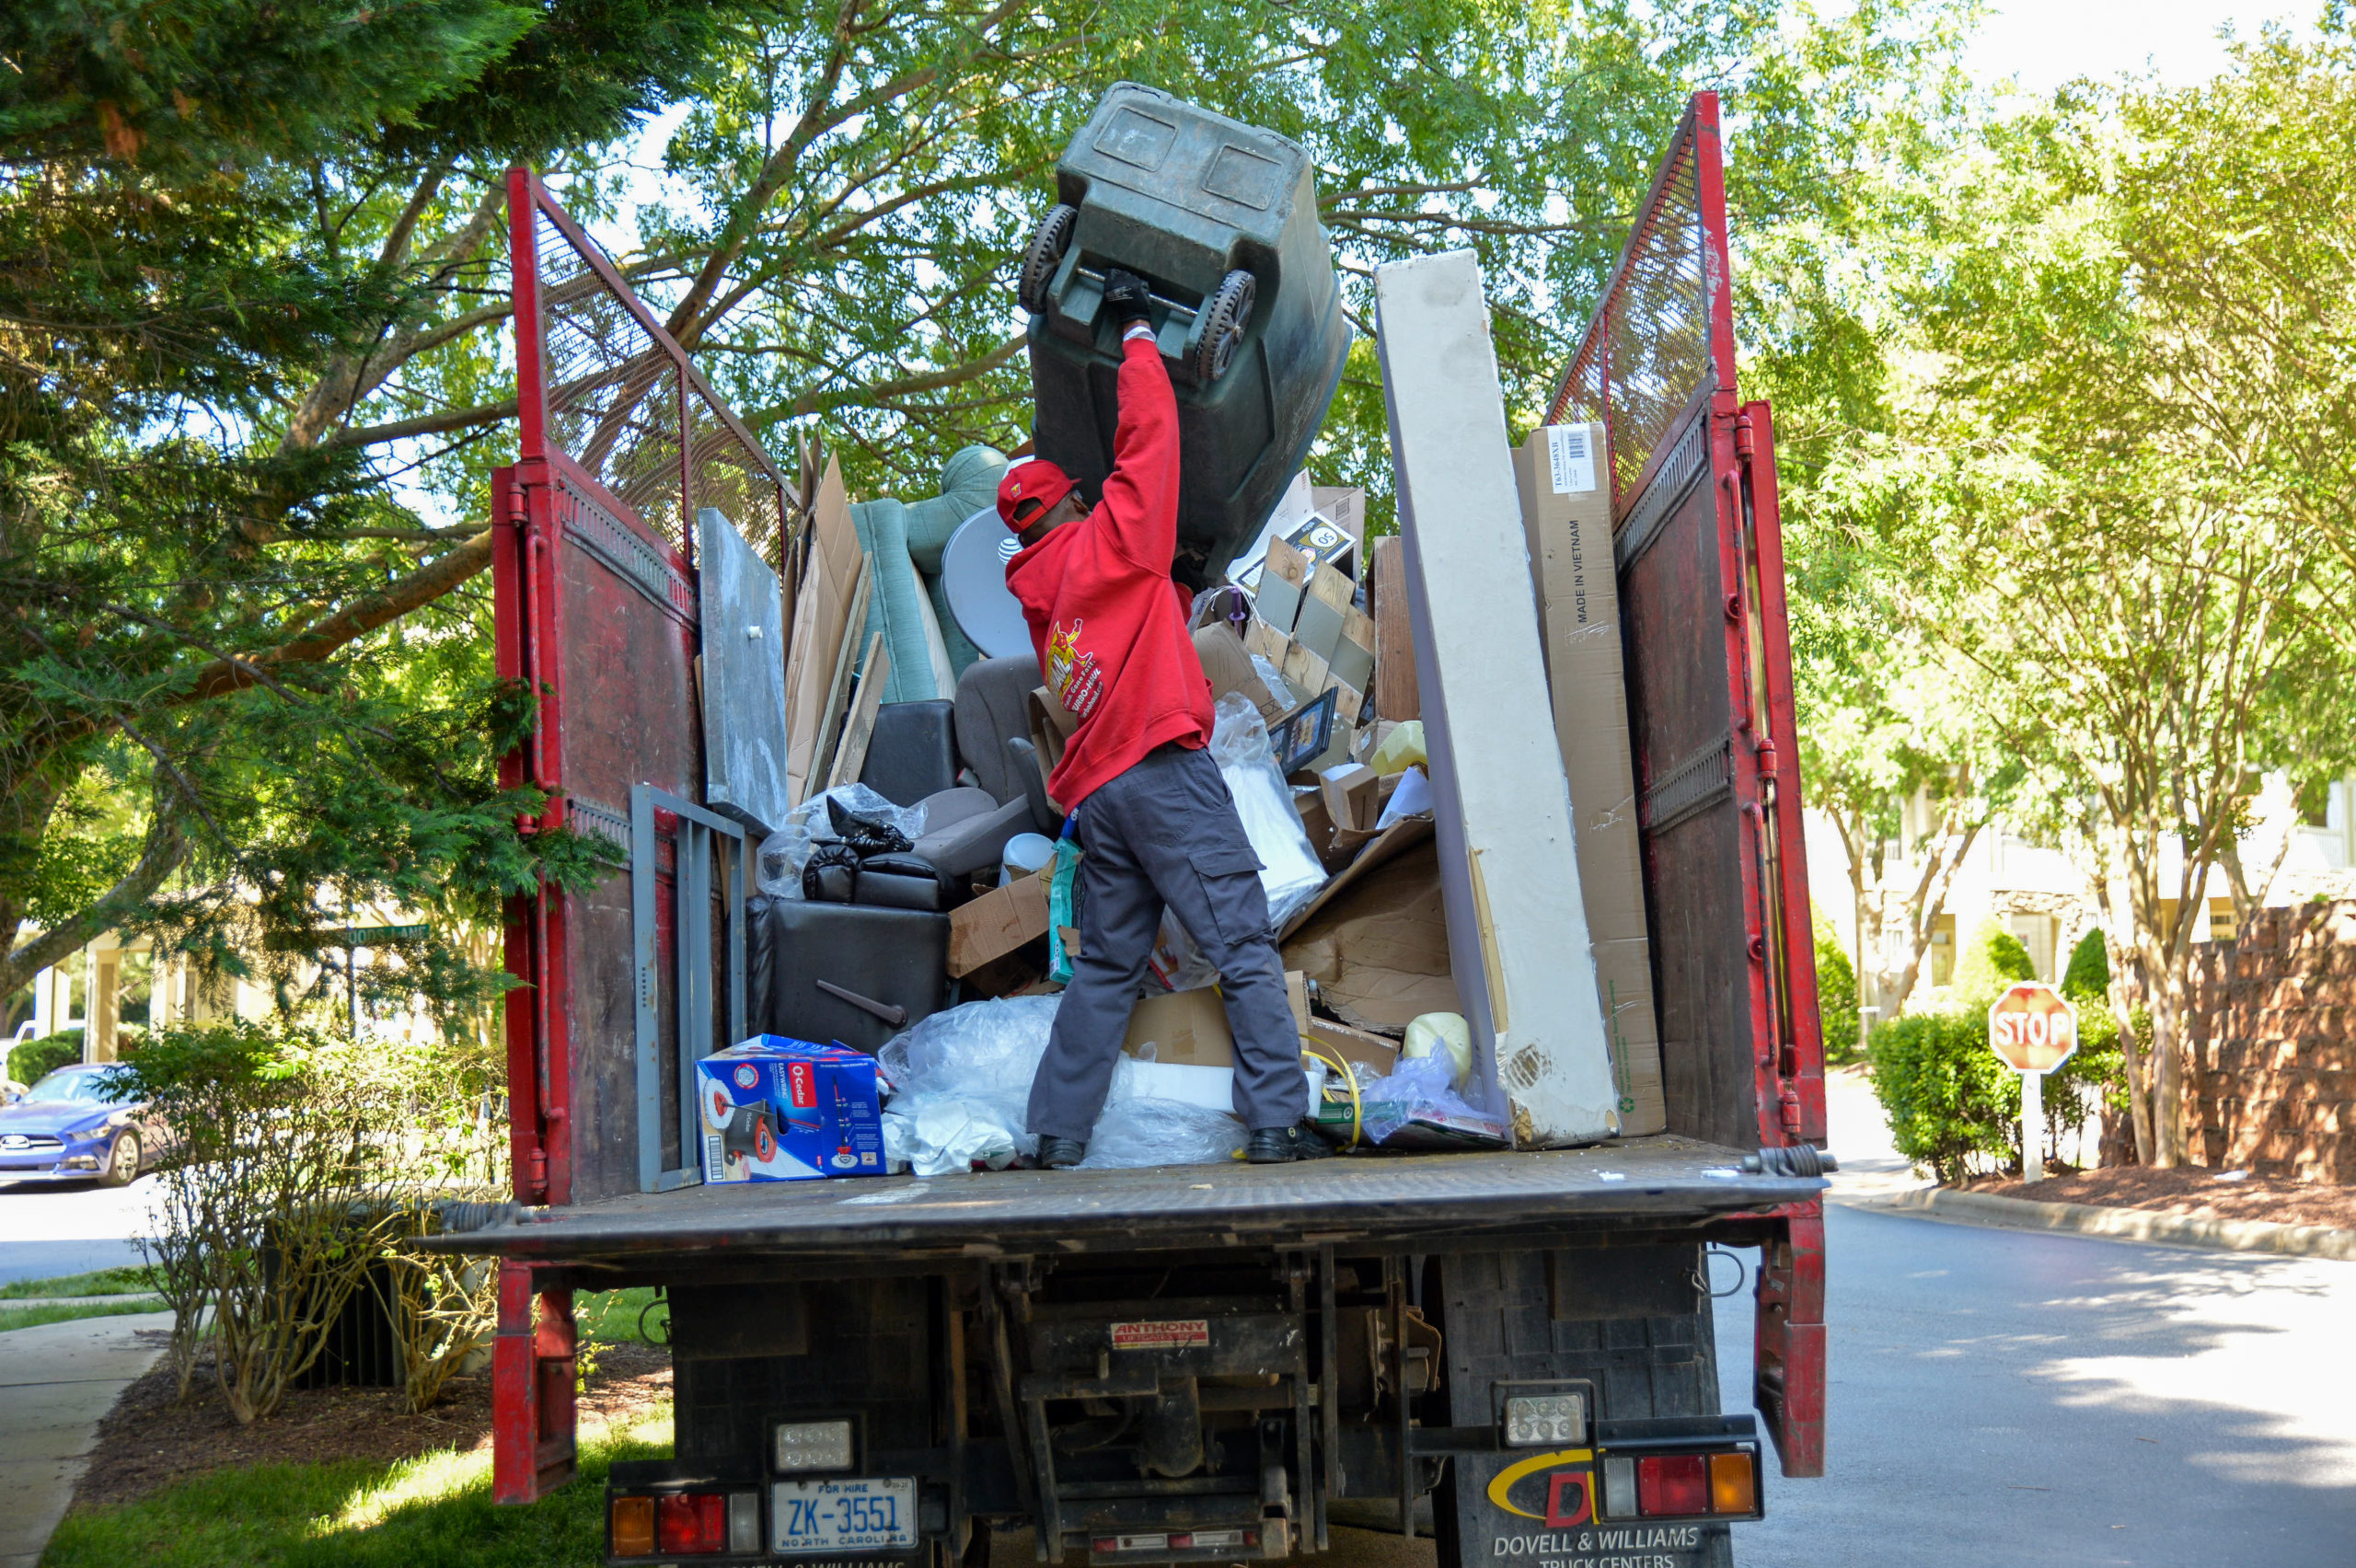 A man lifts a couch into a TurboHaul truck in North Potomac, MD